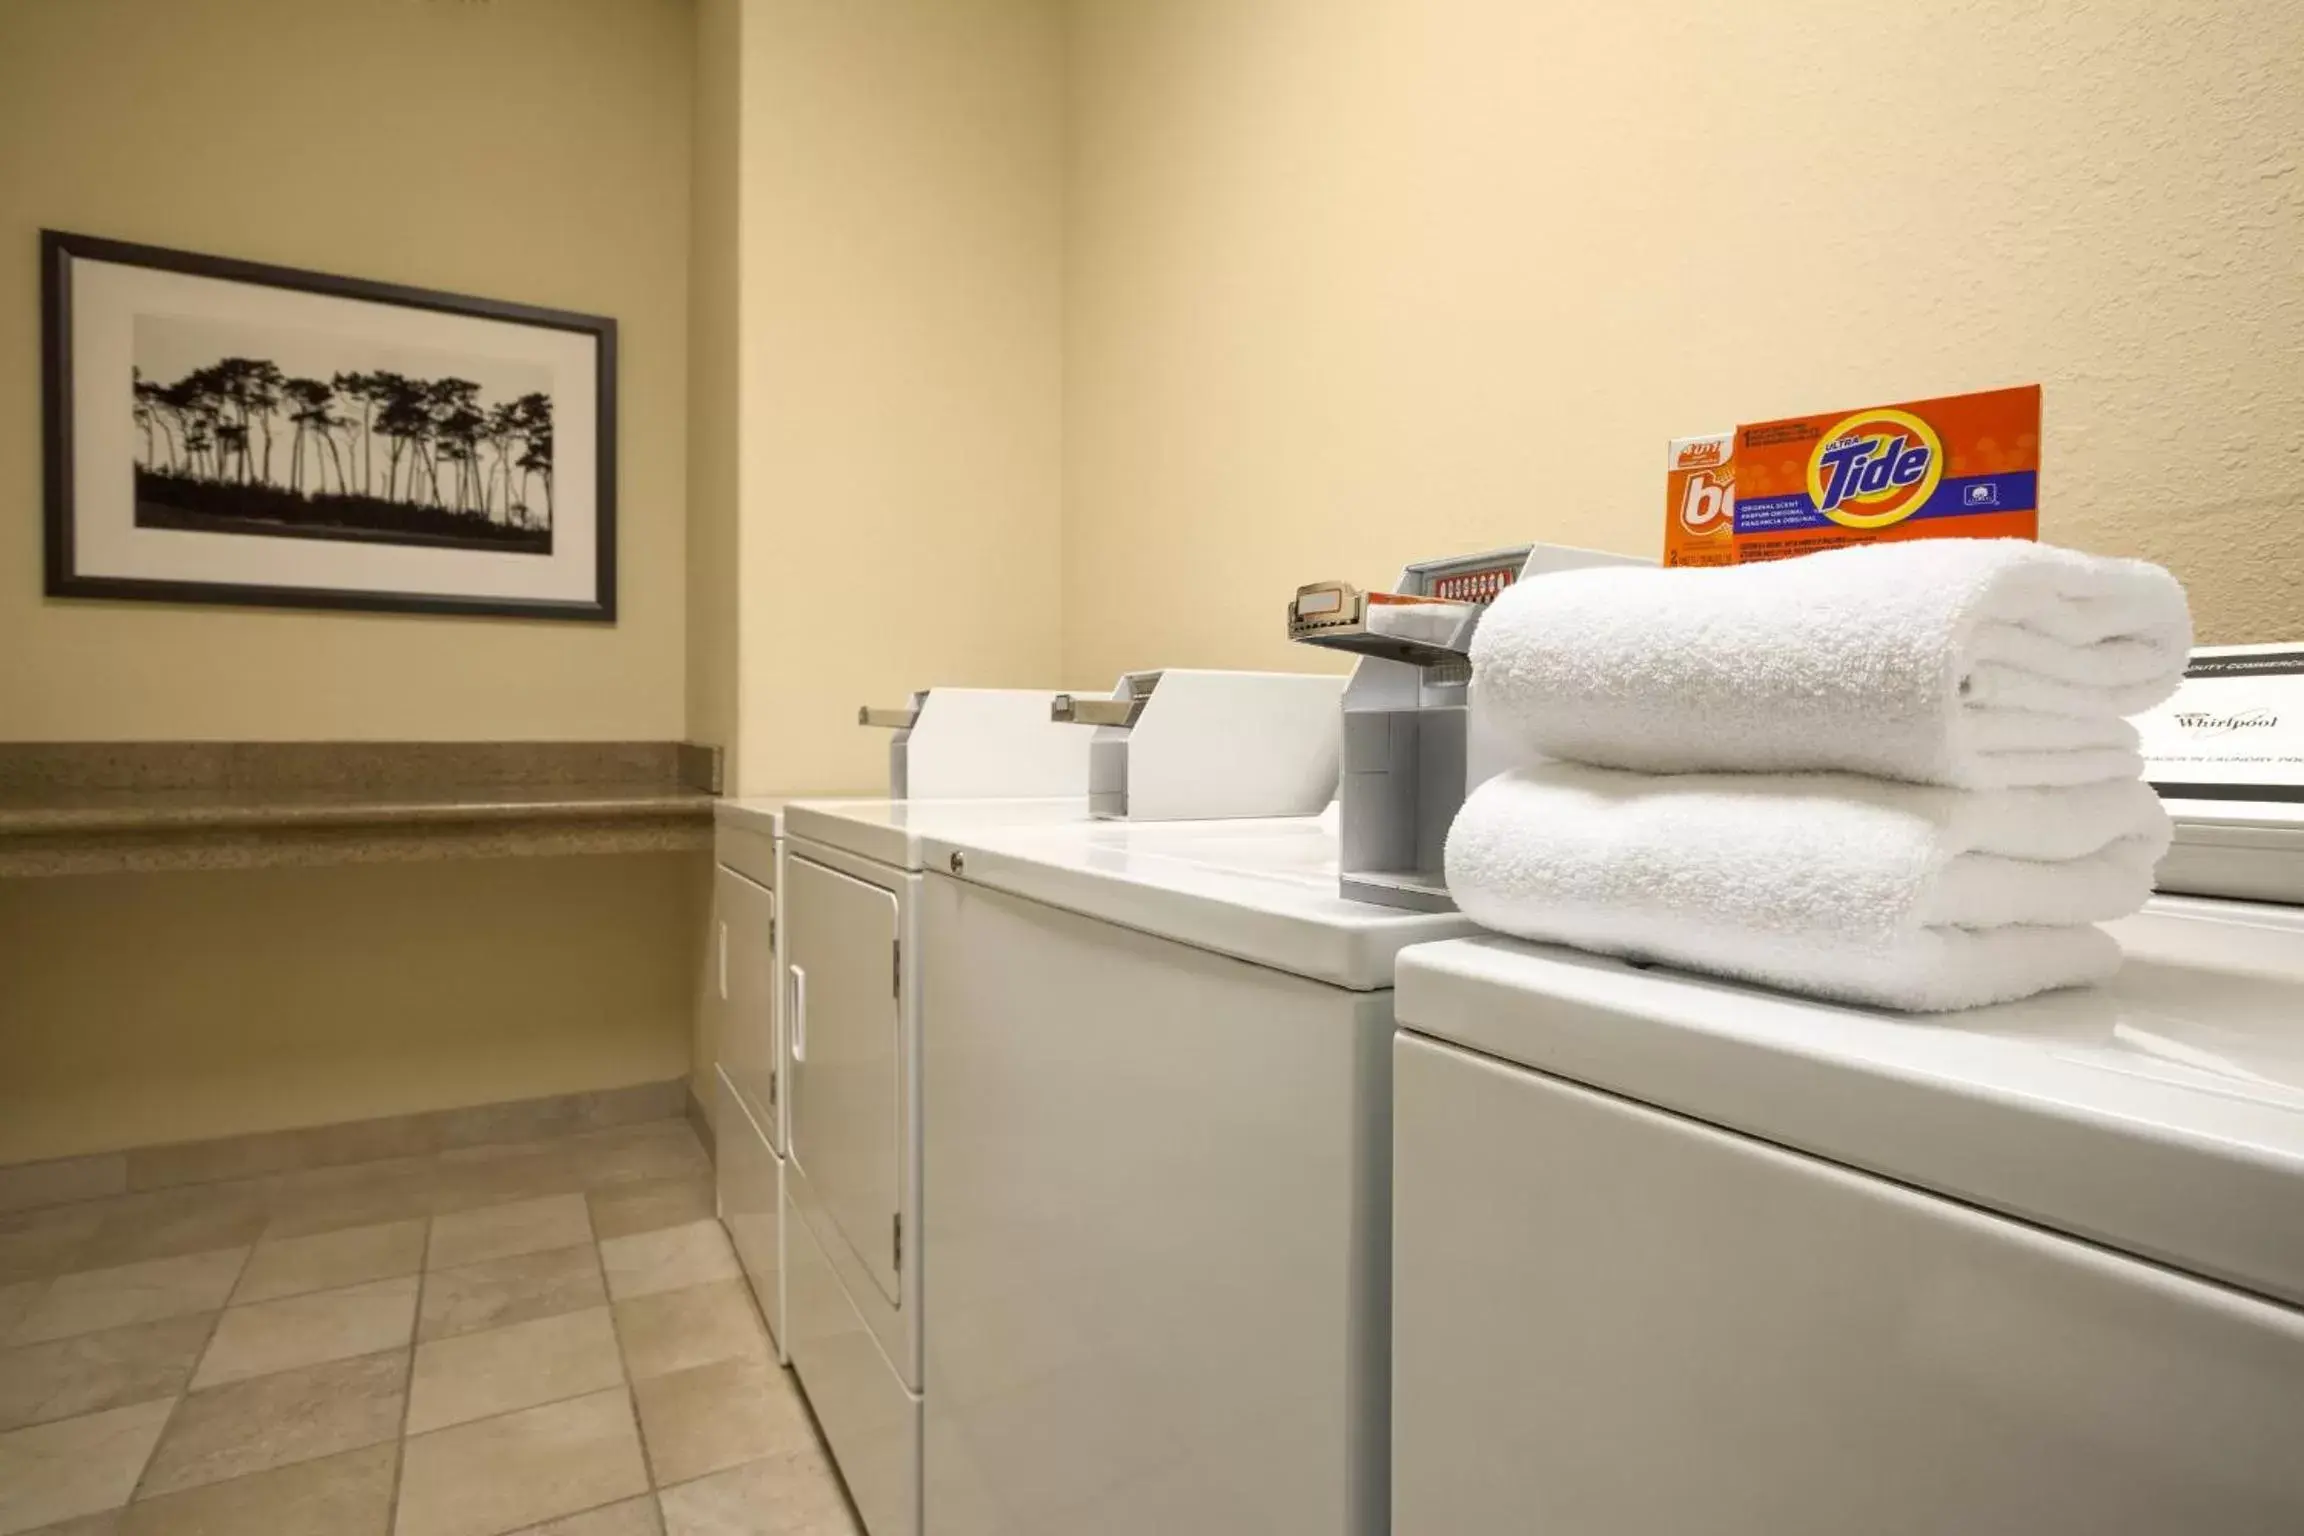 Area and facilities in Country Inn & Suites by Radisson, Charlottesville-UVA, VA